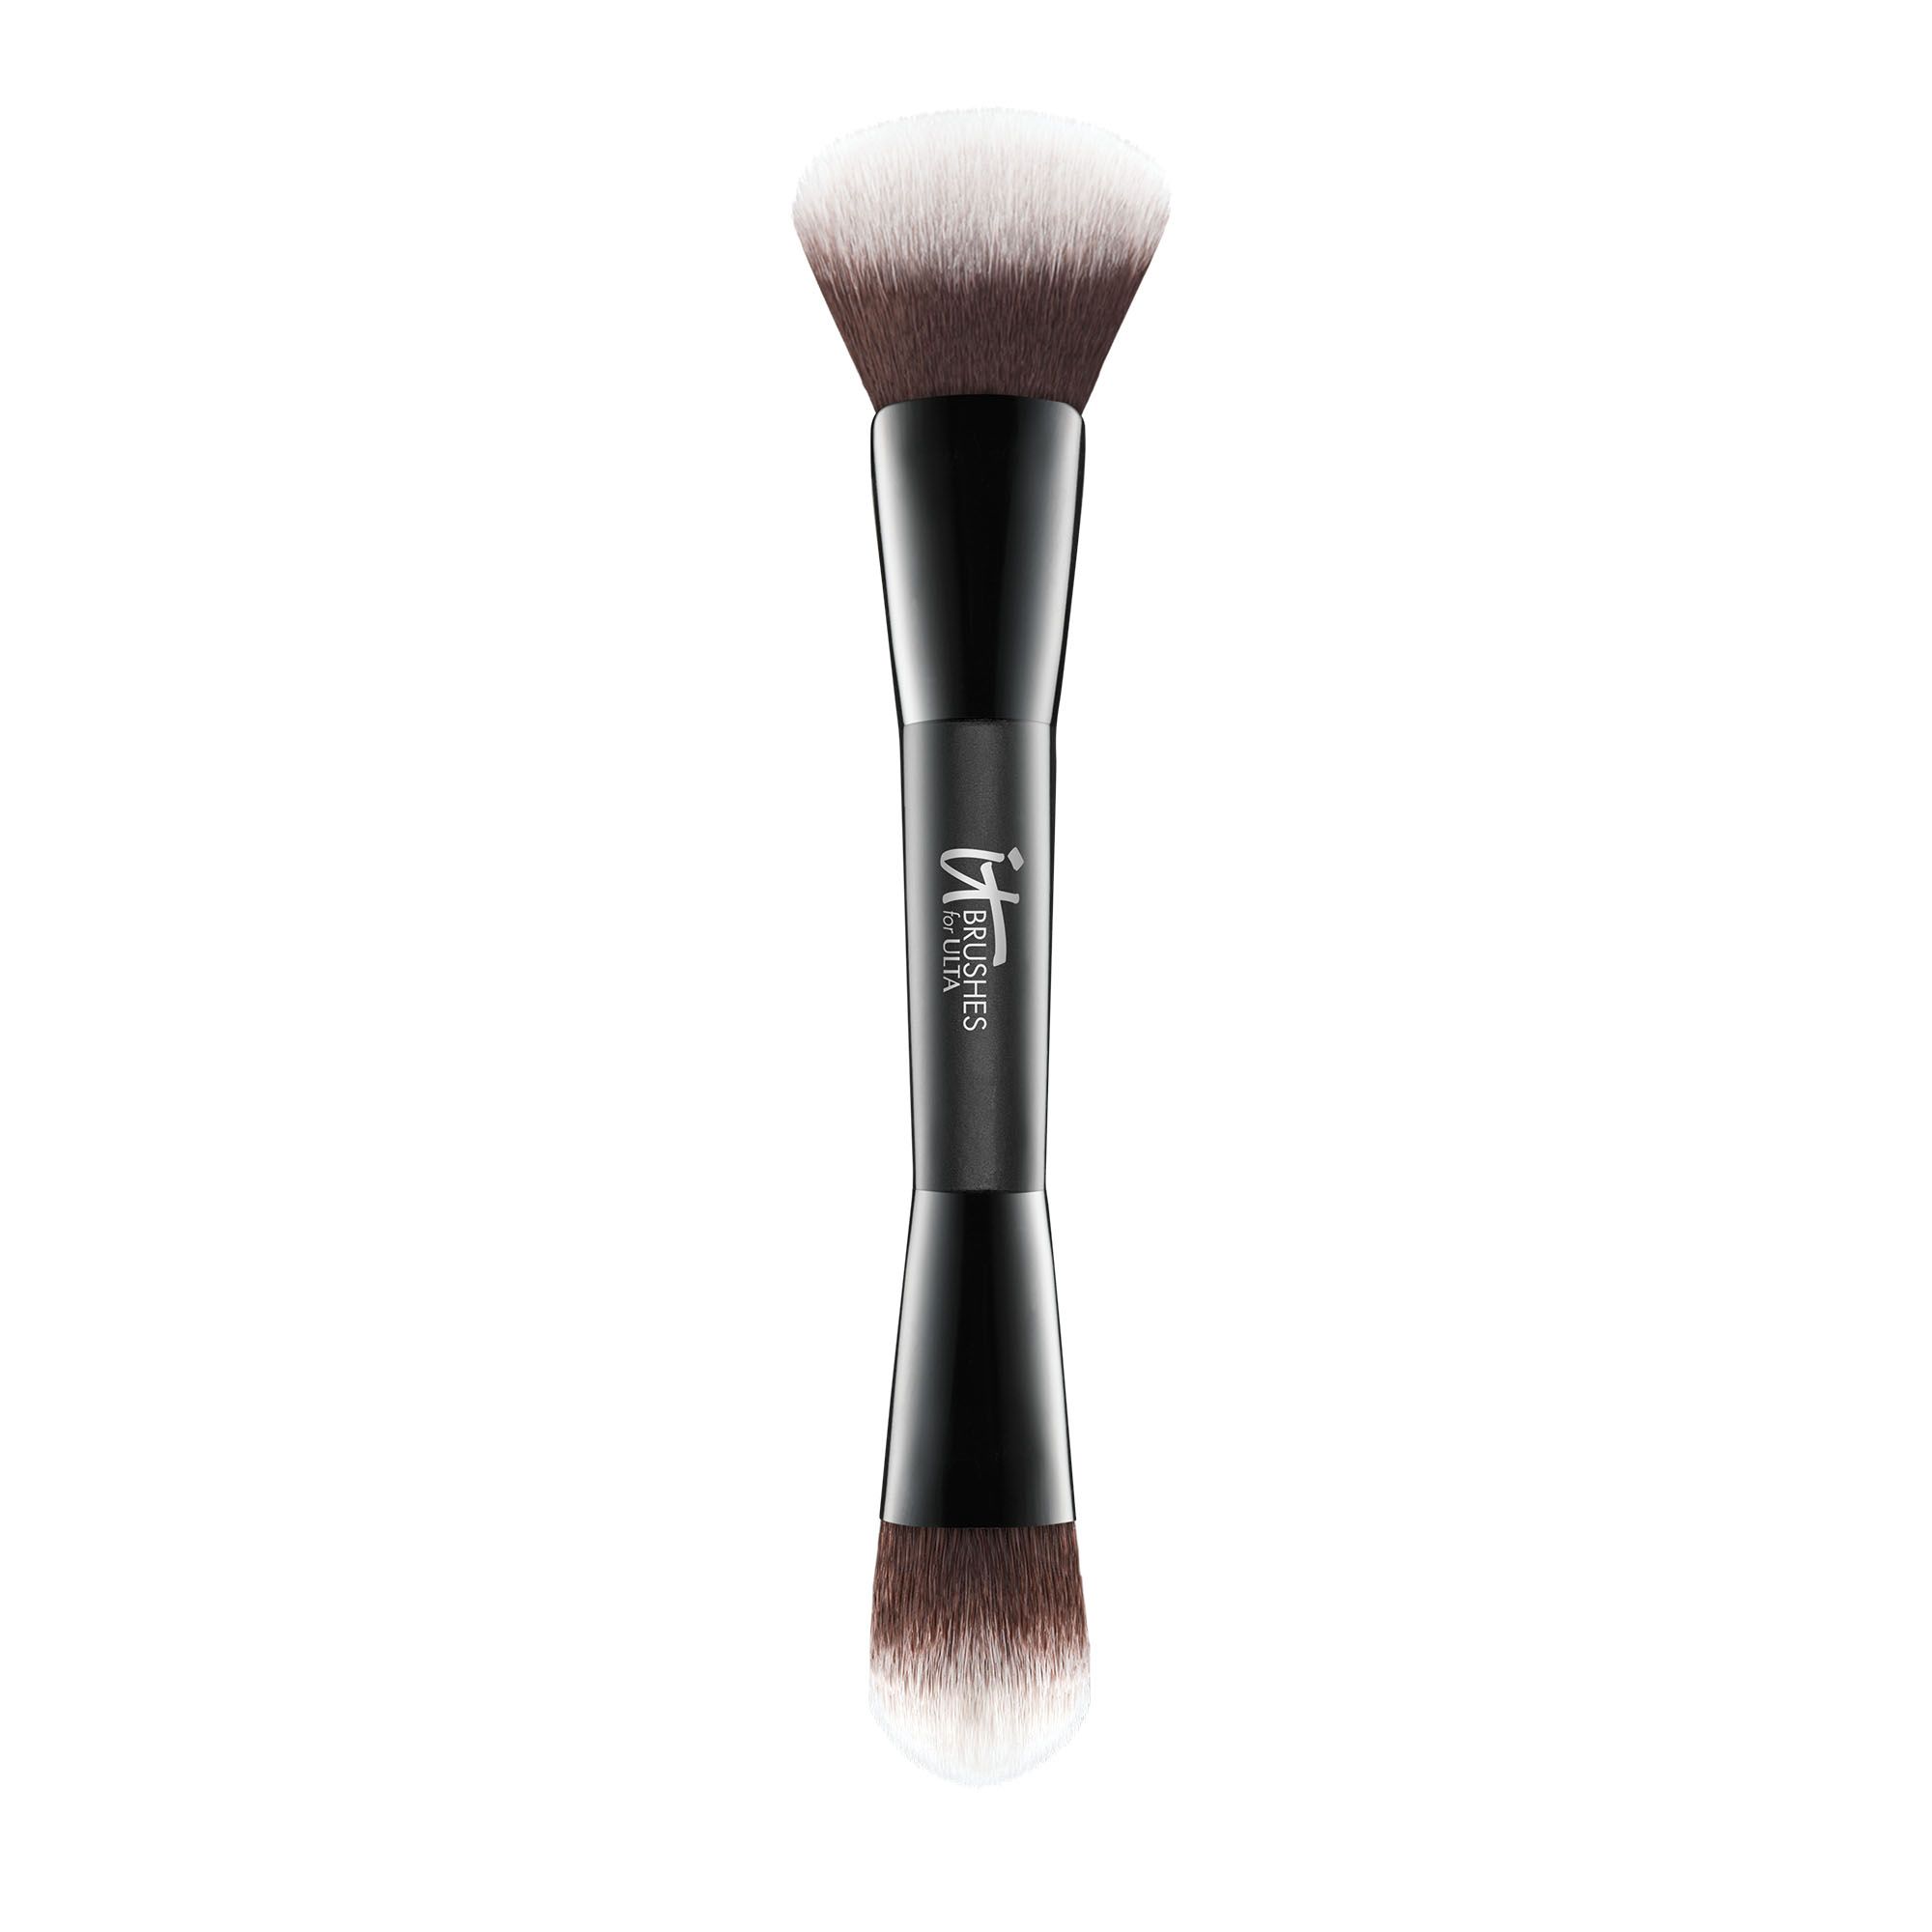 Airbrush Dual-Ended Foundation Brush #134 - IT Cosmetics | IT Cosmetics (US)